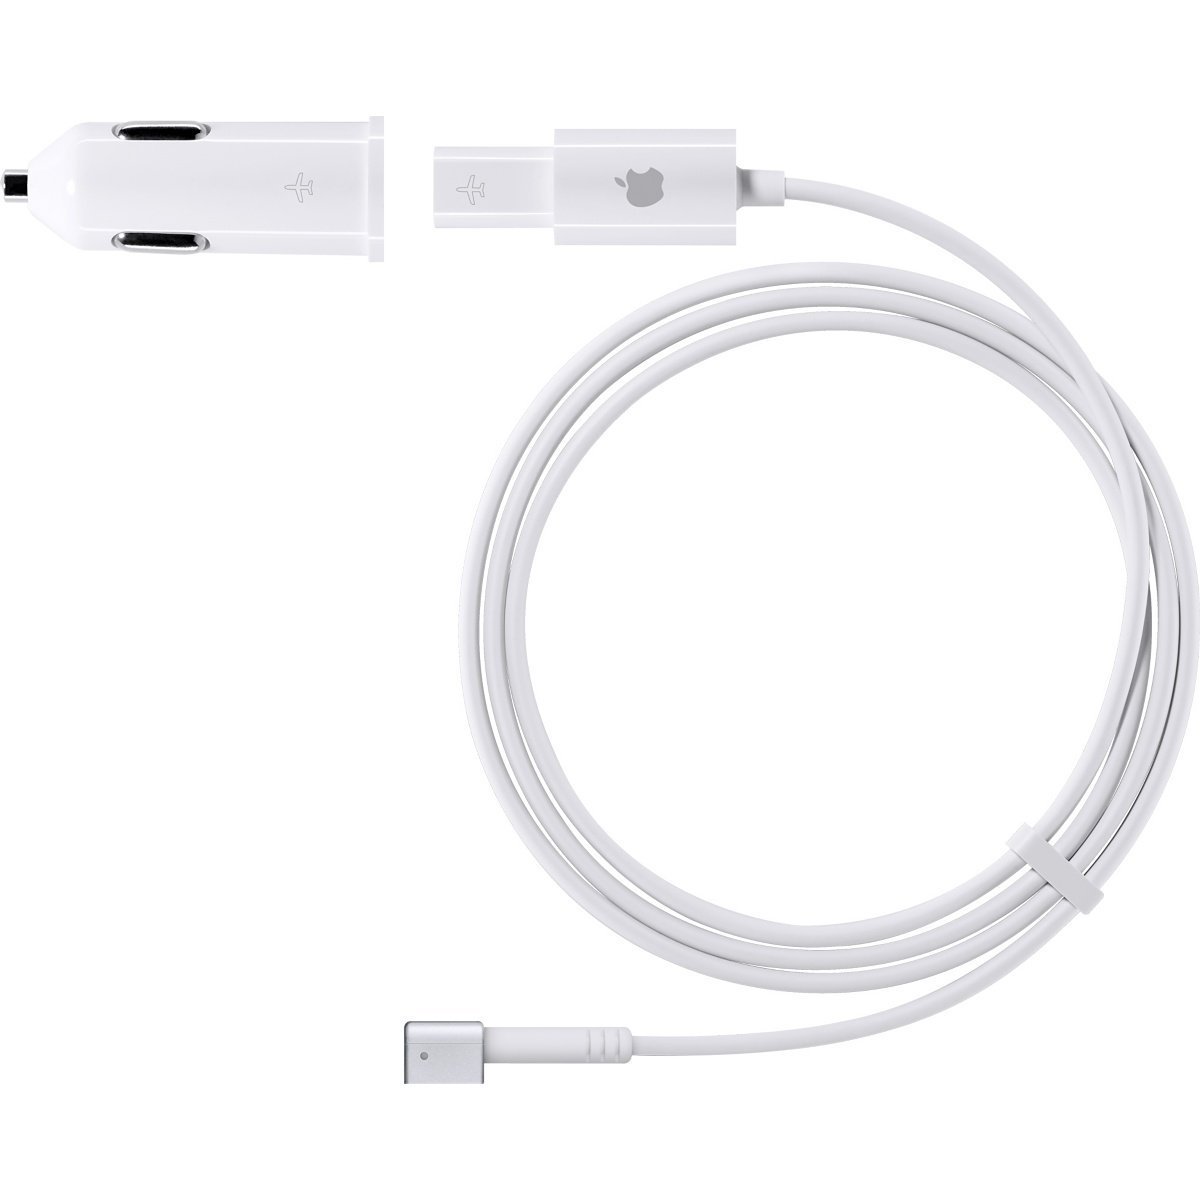 Genuine Apple MagSafe Airline Adapter: MB441Z/A - $29.95